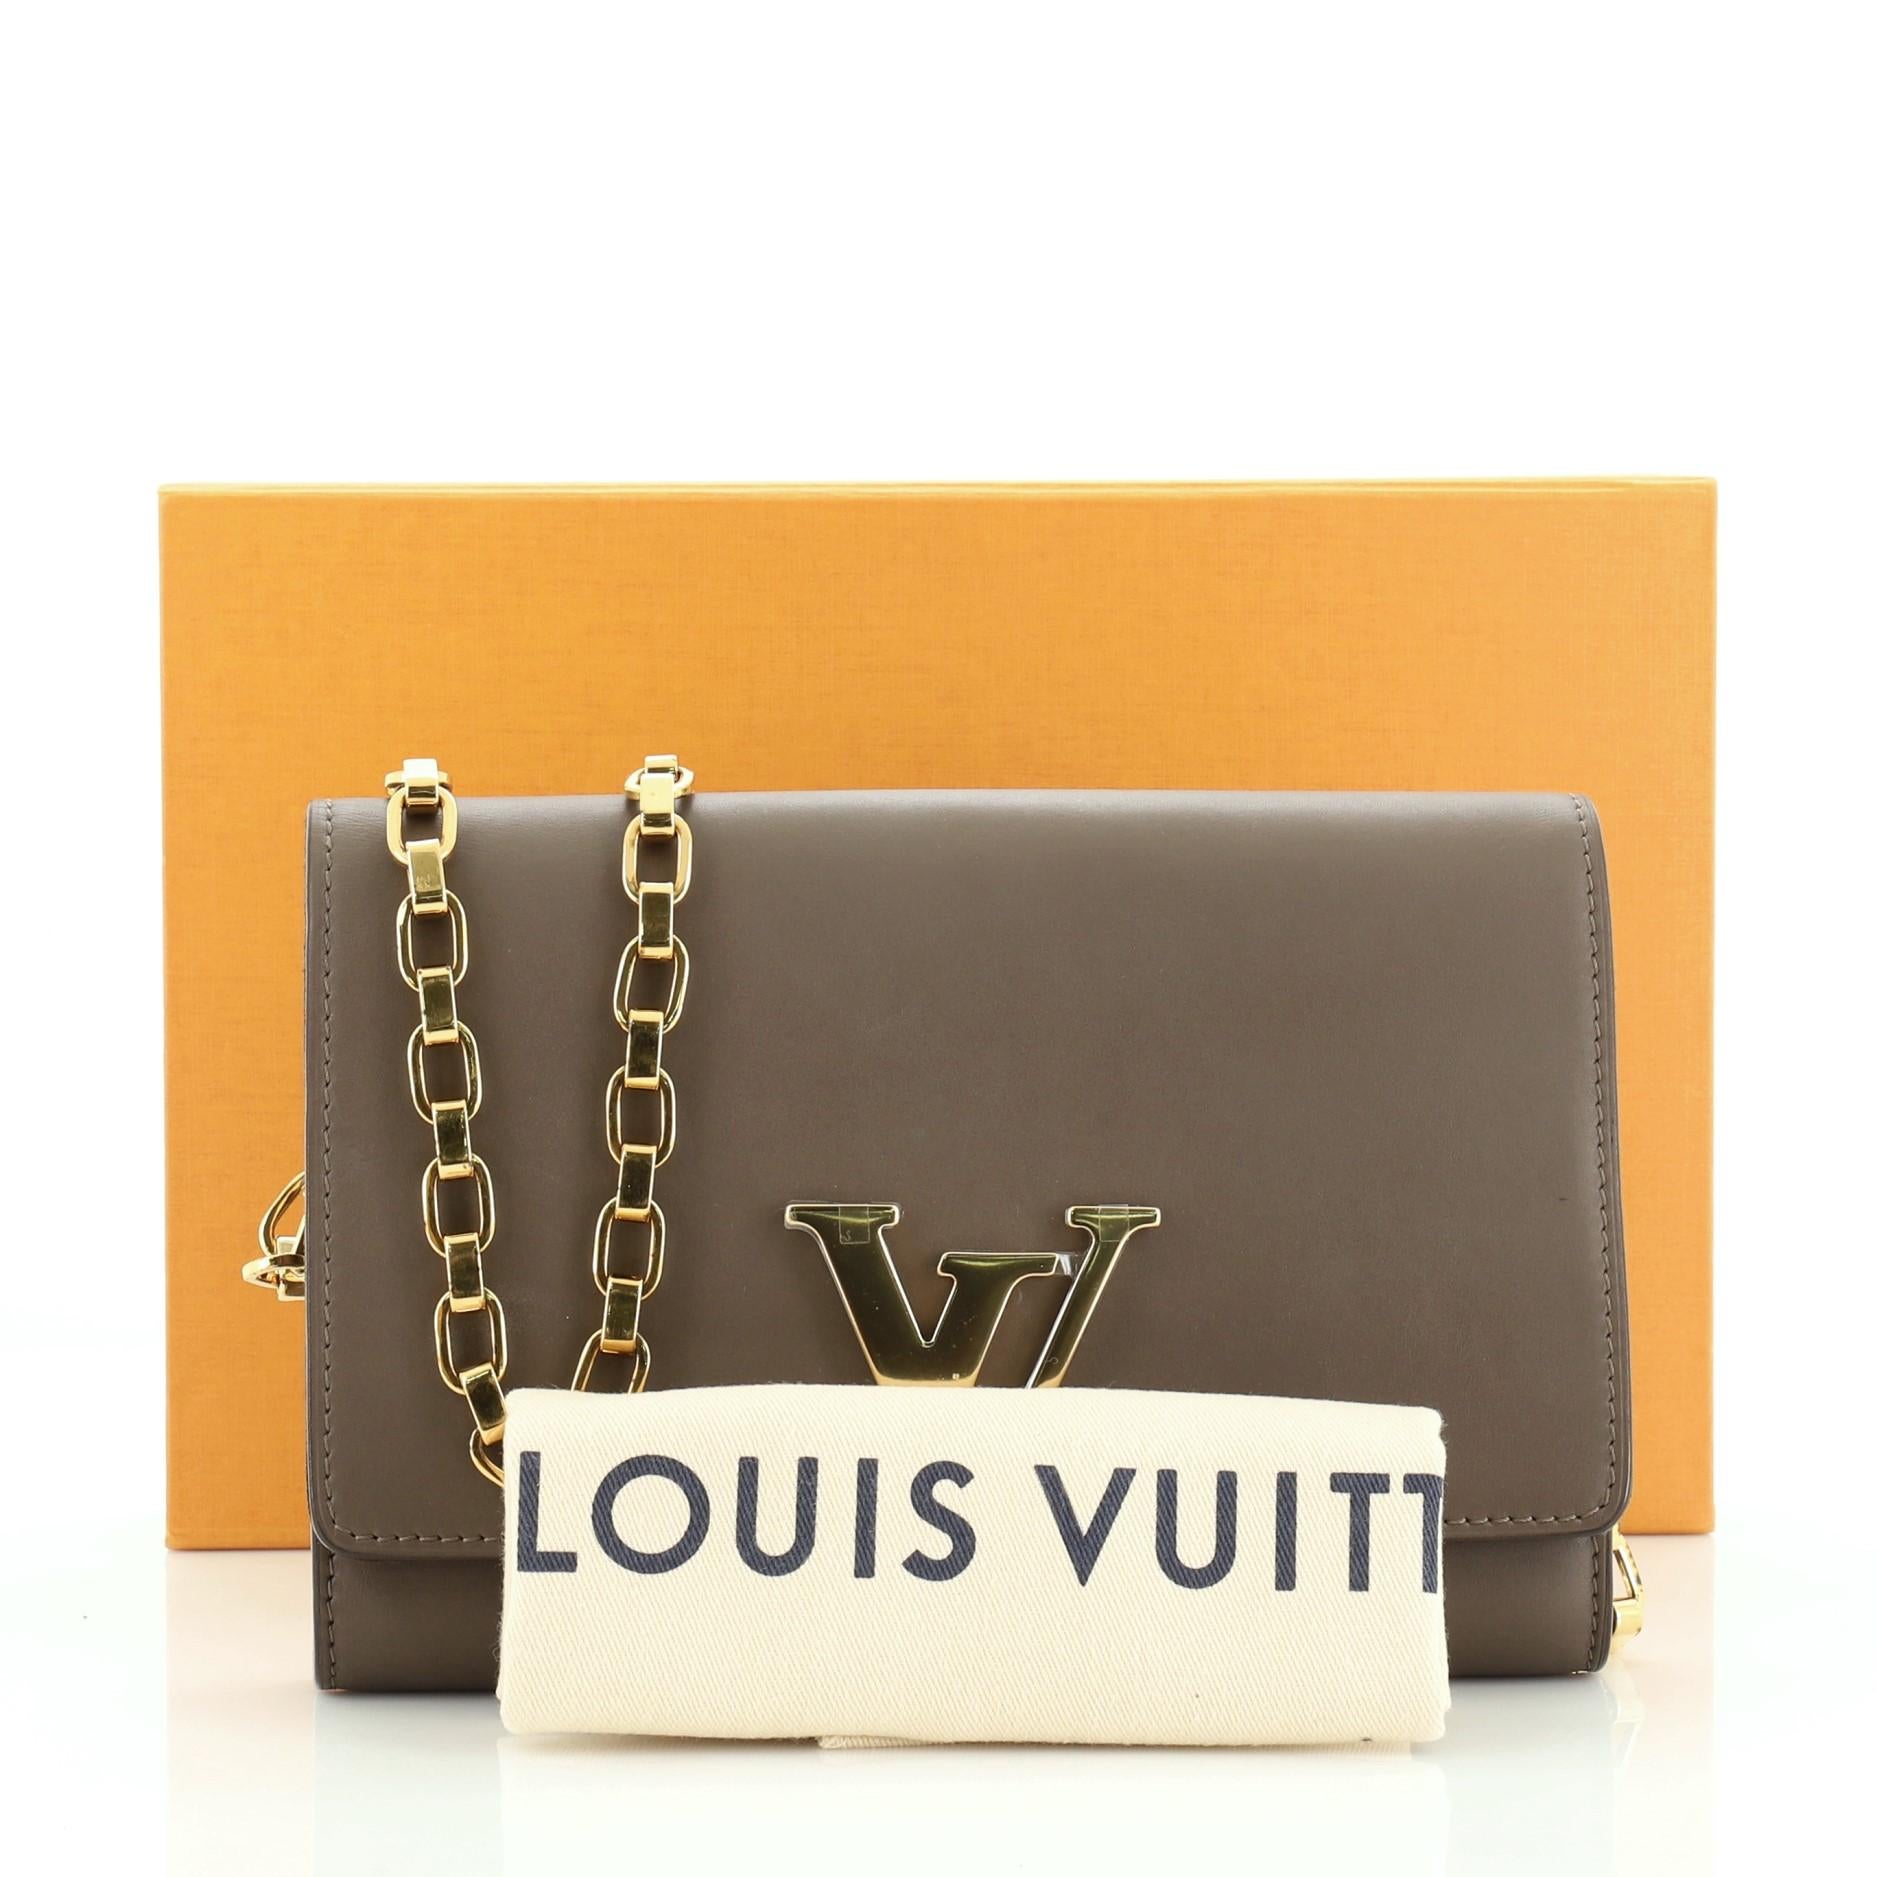 This Louis Vuitton Chain Louise Clutch Leather GM, crafted in brown leather, features an oversized LV logo flip lock clasp closure, chain link strap and gold-tone hardware. Its flap opens to a brown microfiber and leather interior with zip pocket